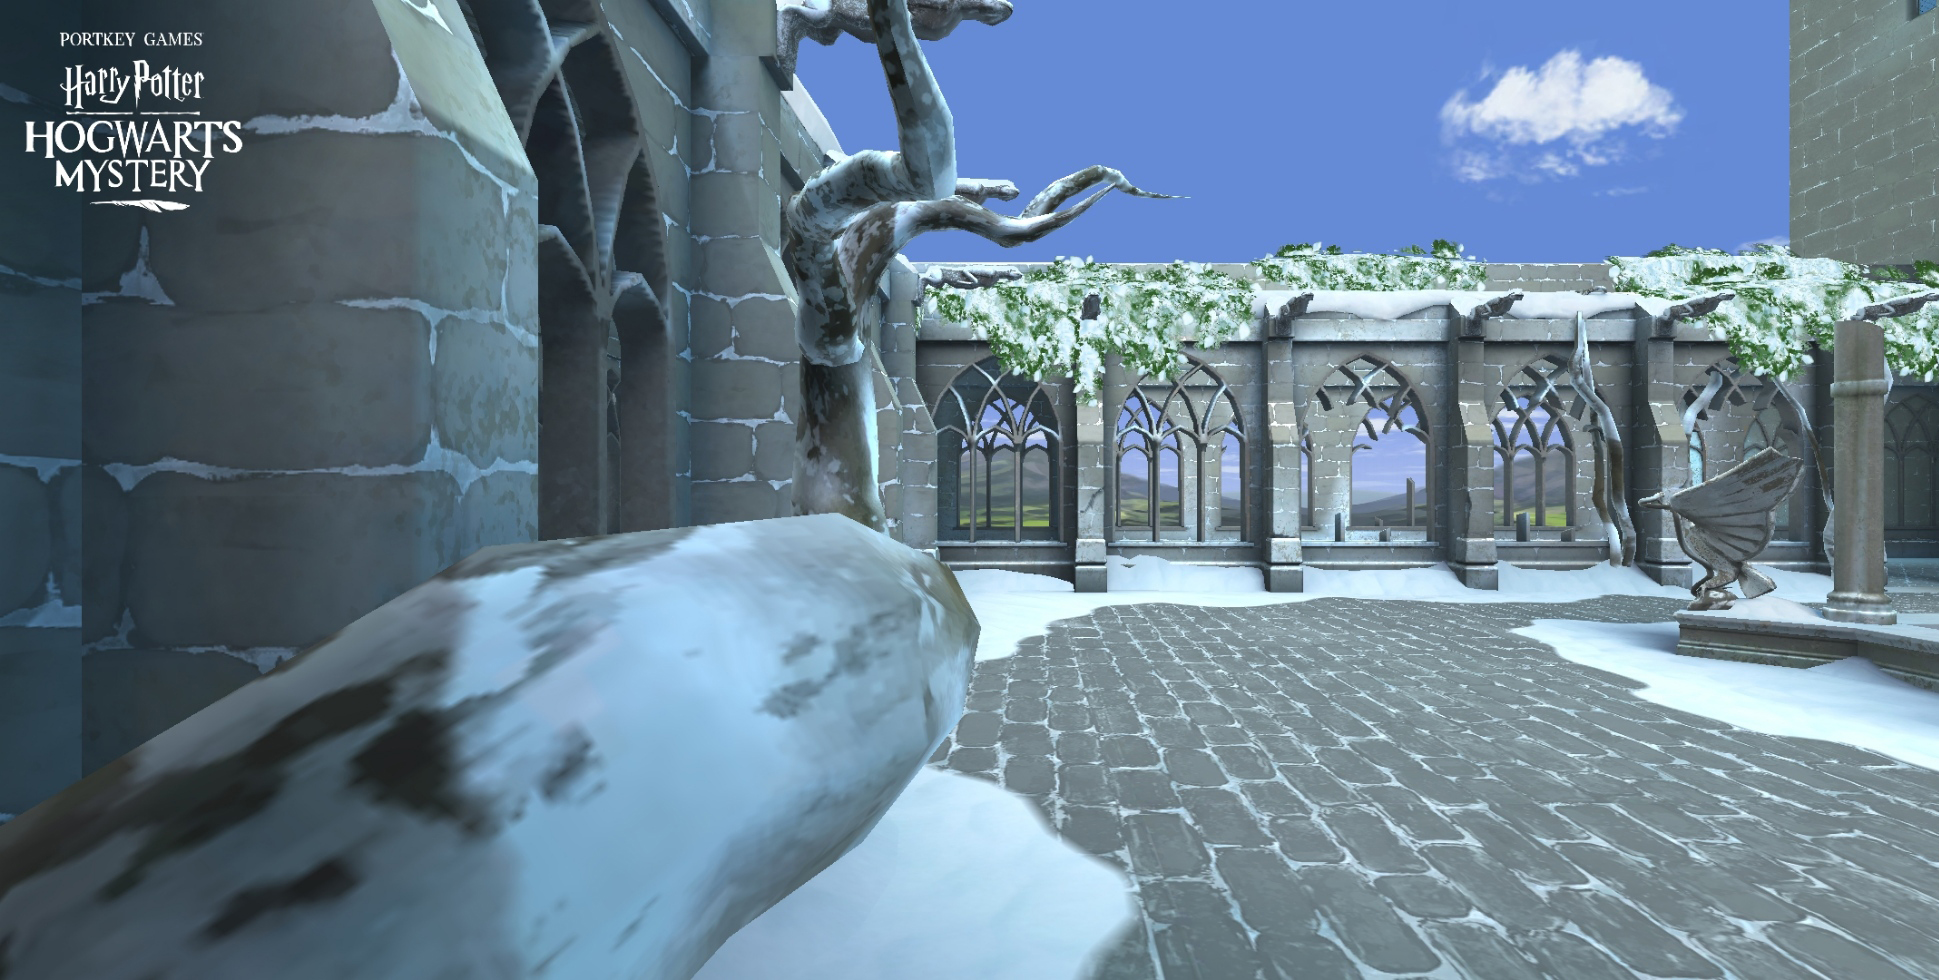 The Courtyard looks like a fun place for a snowball fight.